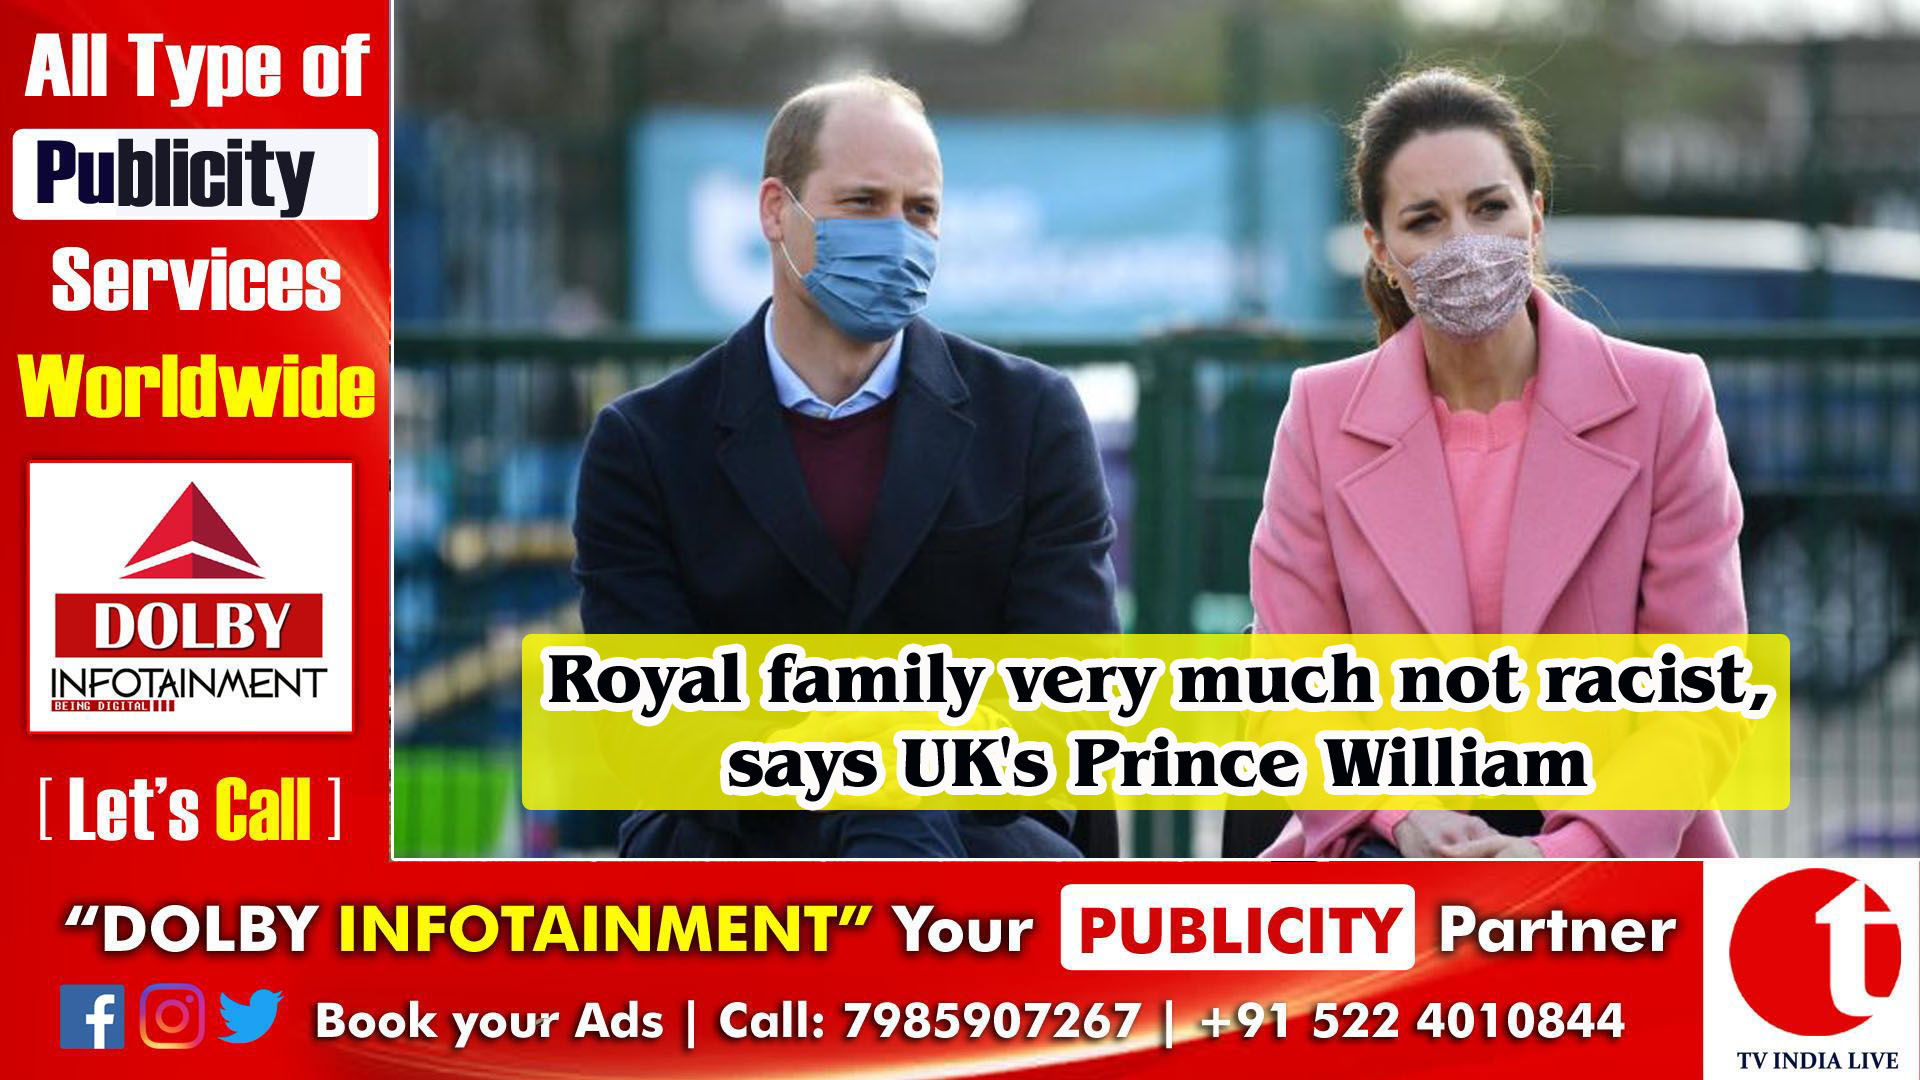 Royal family very much not racist, says UK's Prince William